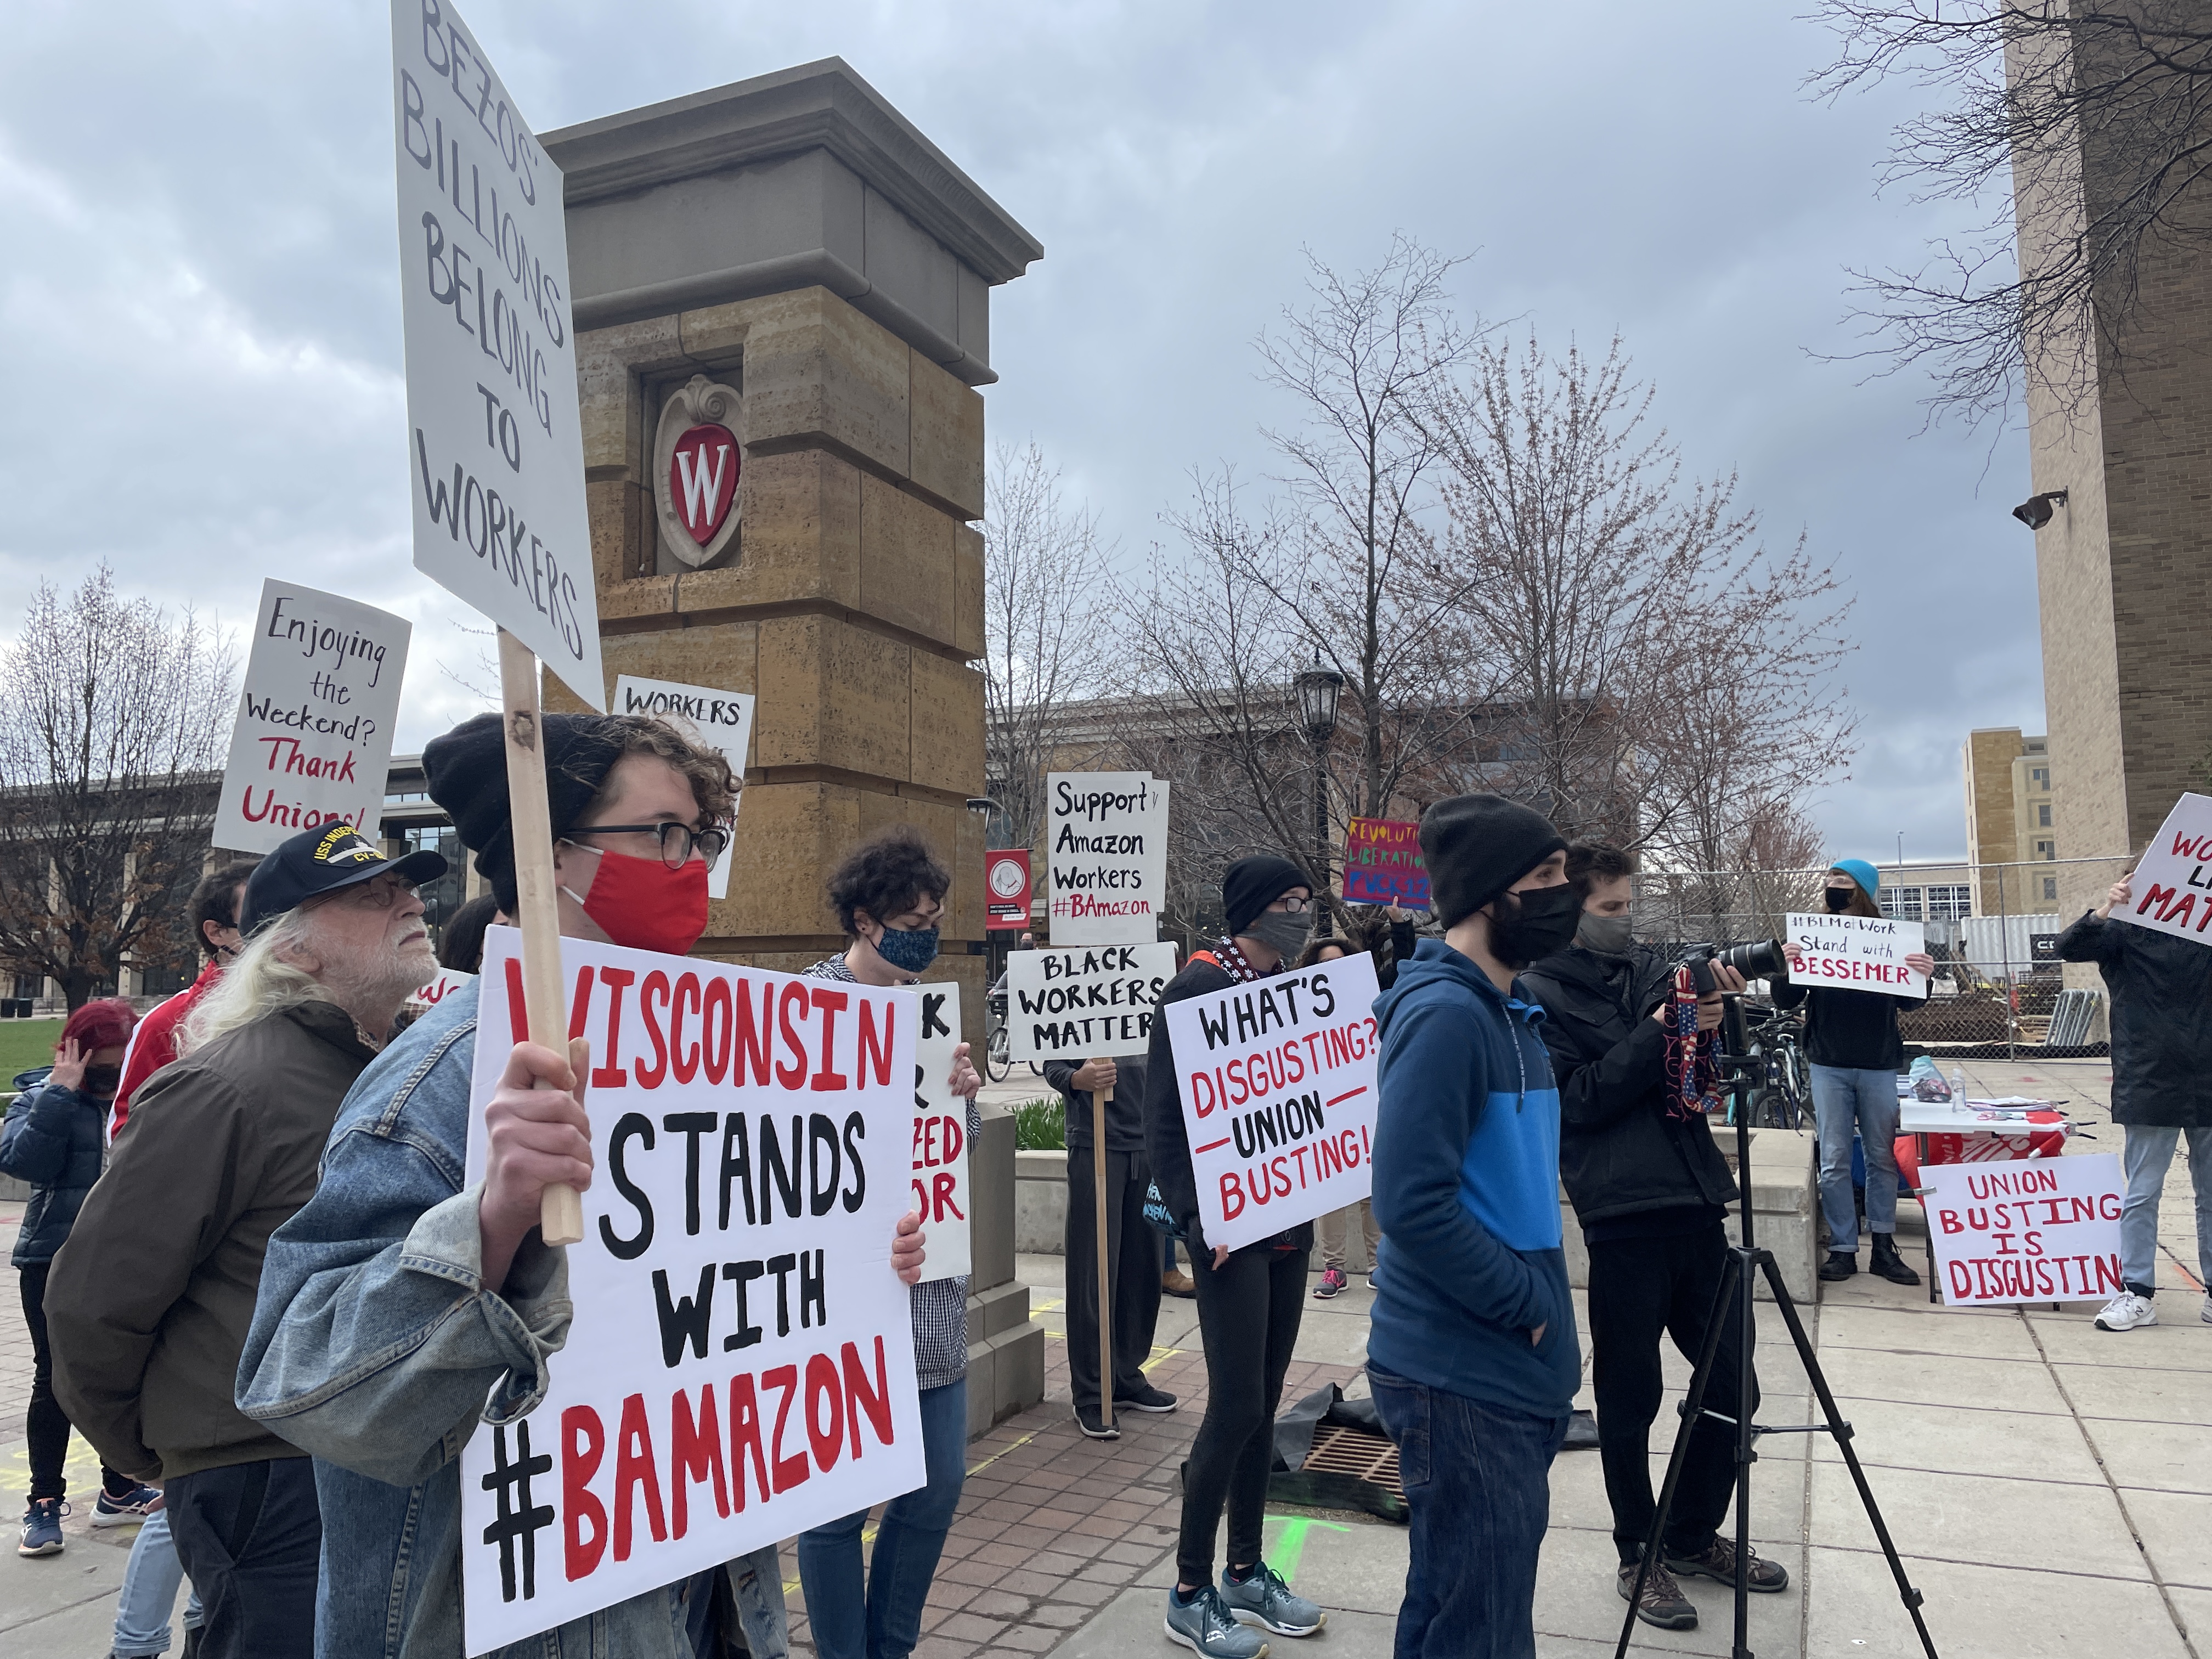 Madison organizations showed solidarity with Amazon workers organizing in Alabama